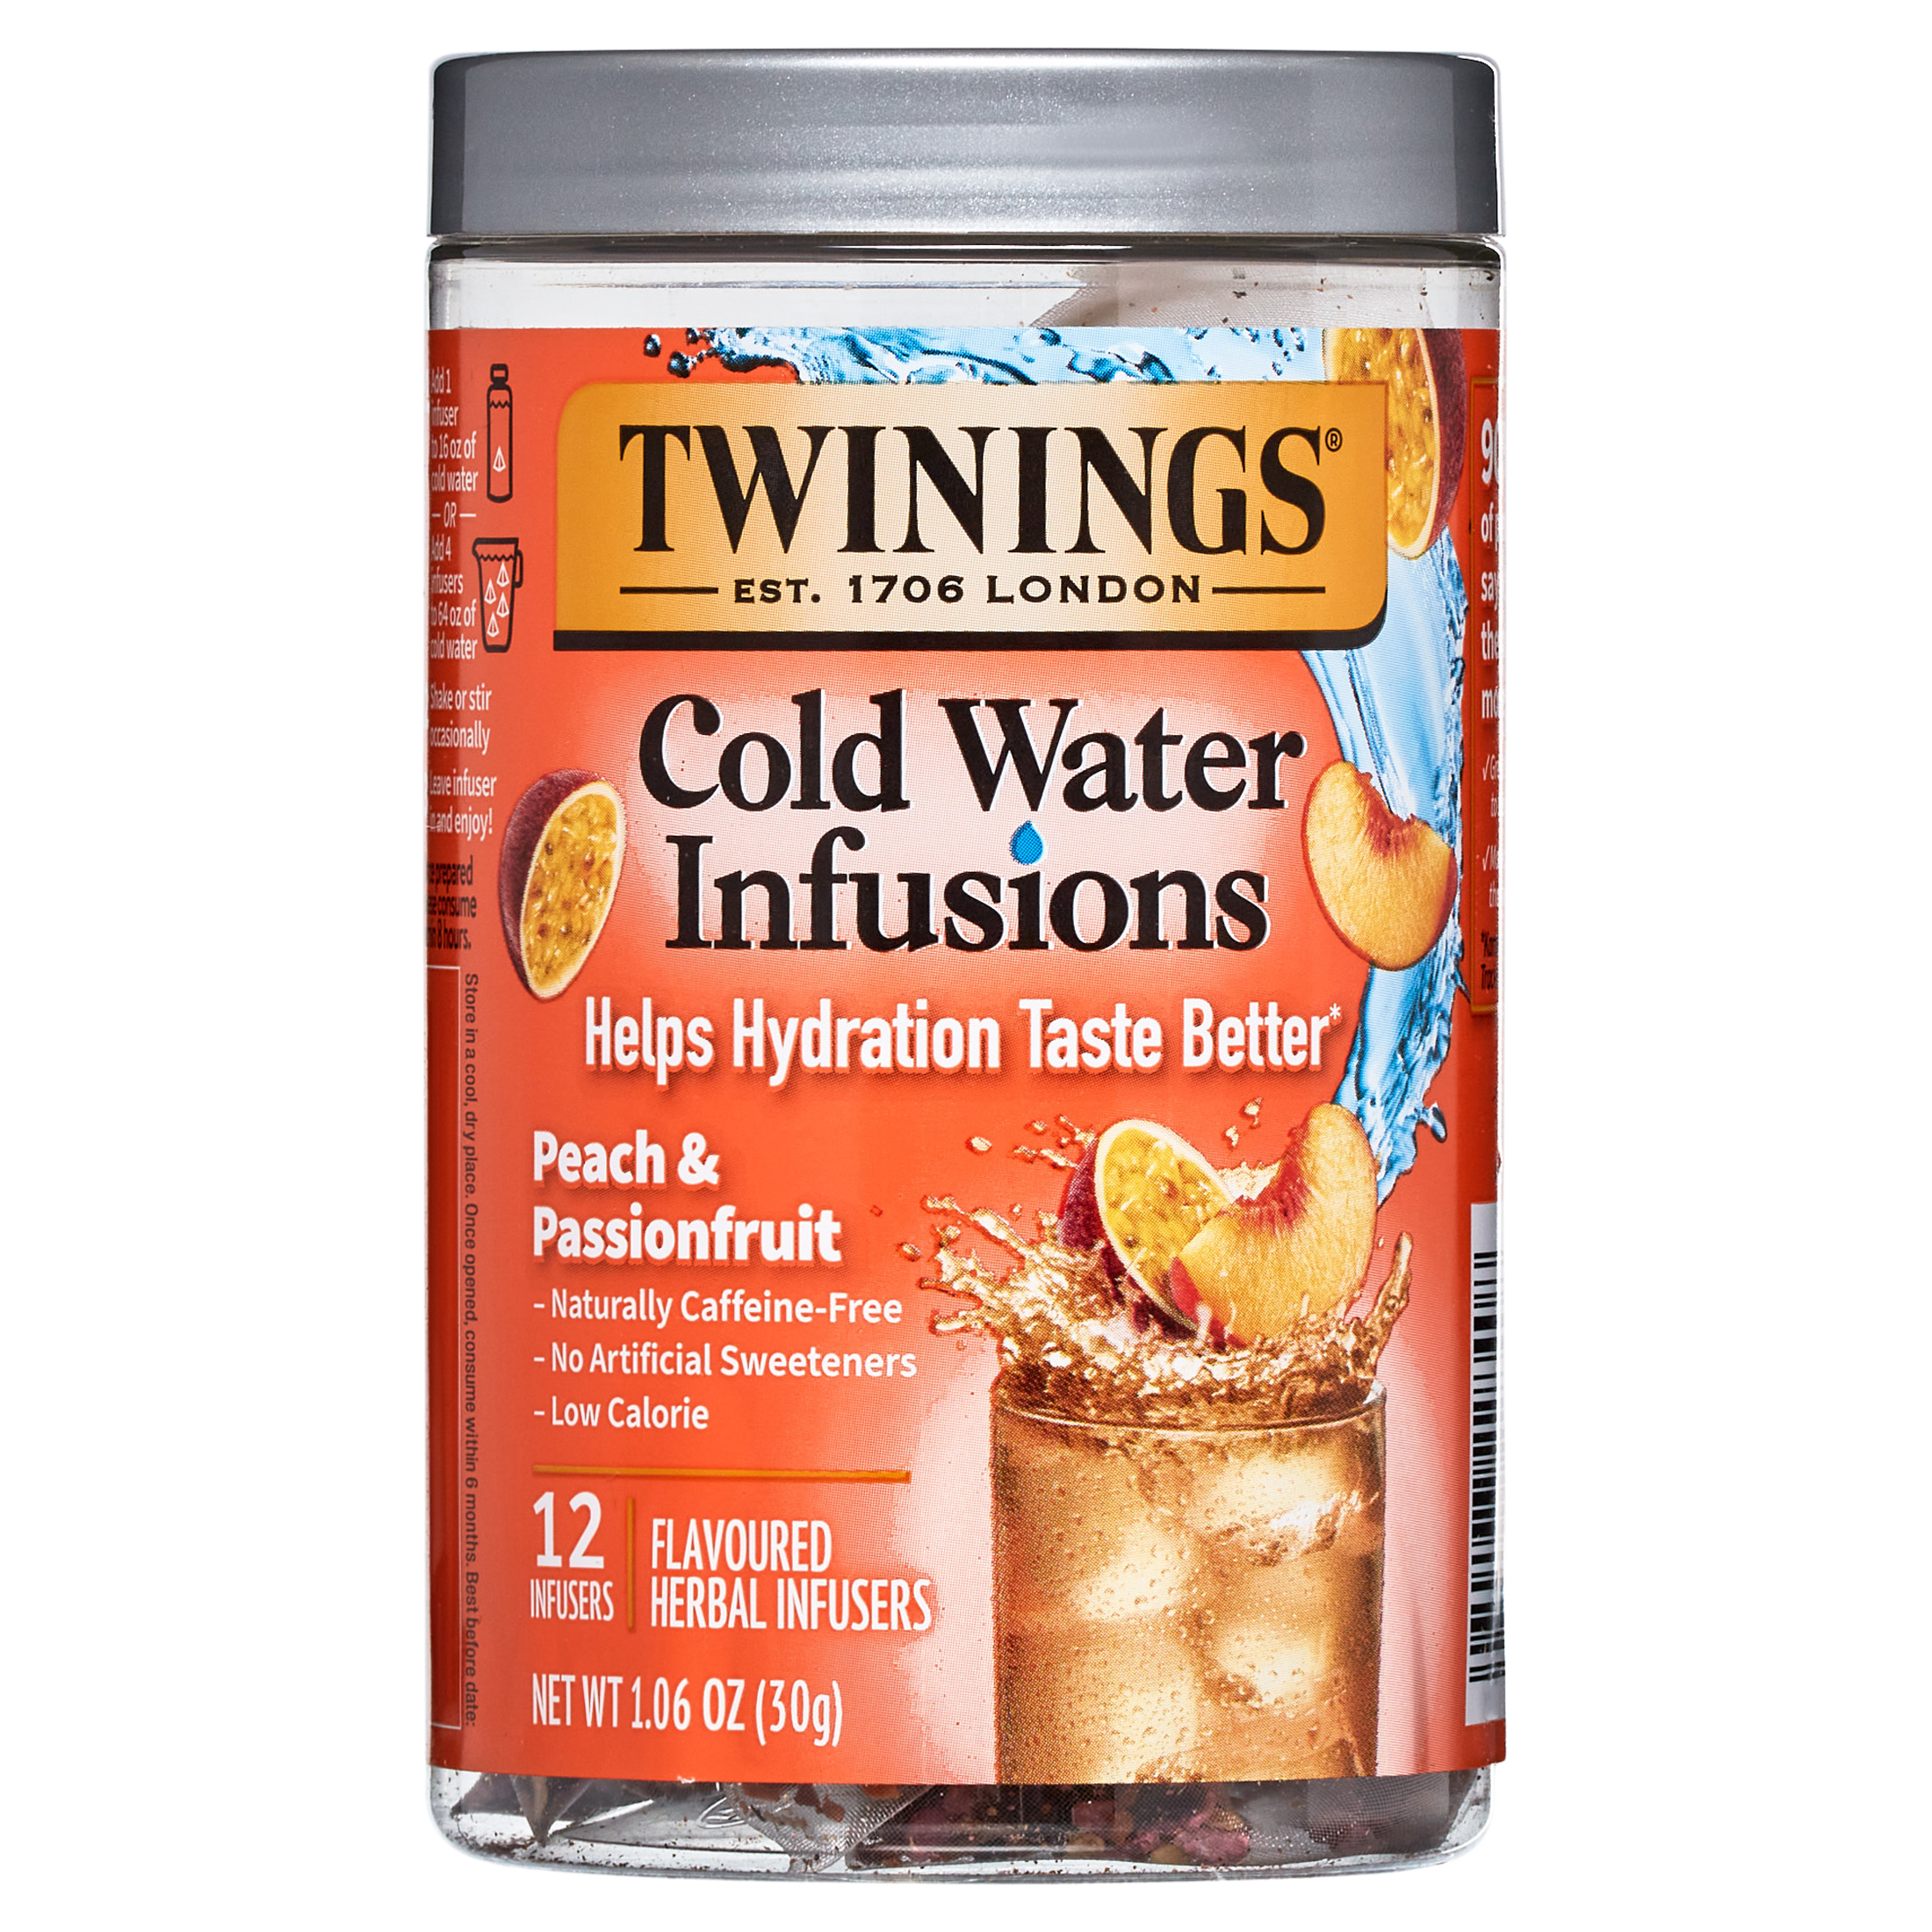 Twinings Cold Water Infusions, Peach & Passionfruit Infuser Bags, 12 Count Canister - image 1 of 13